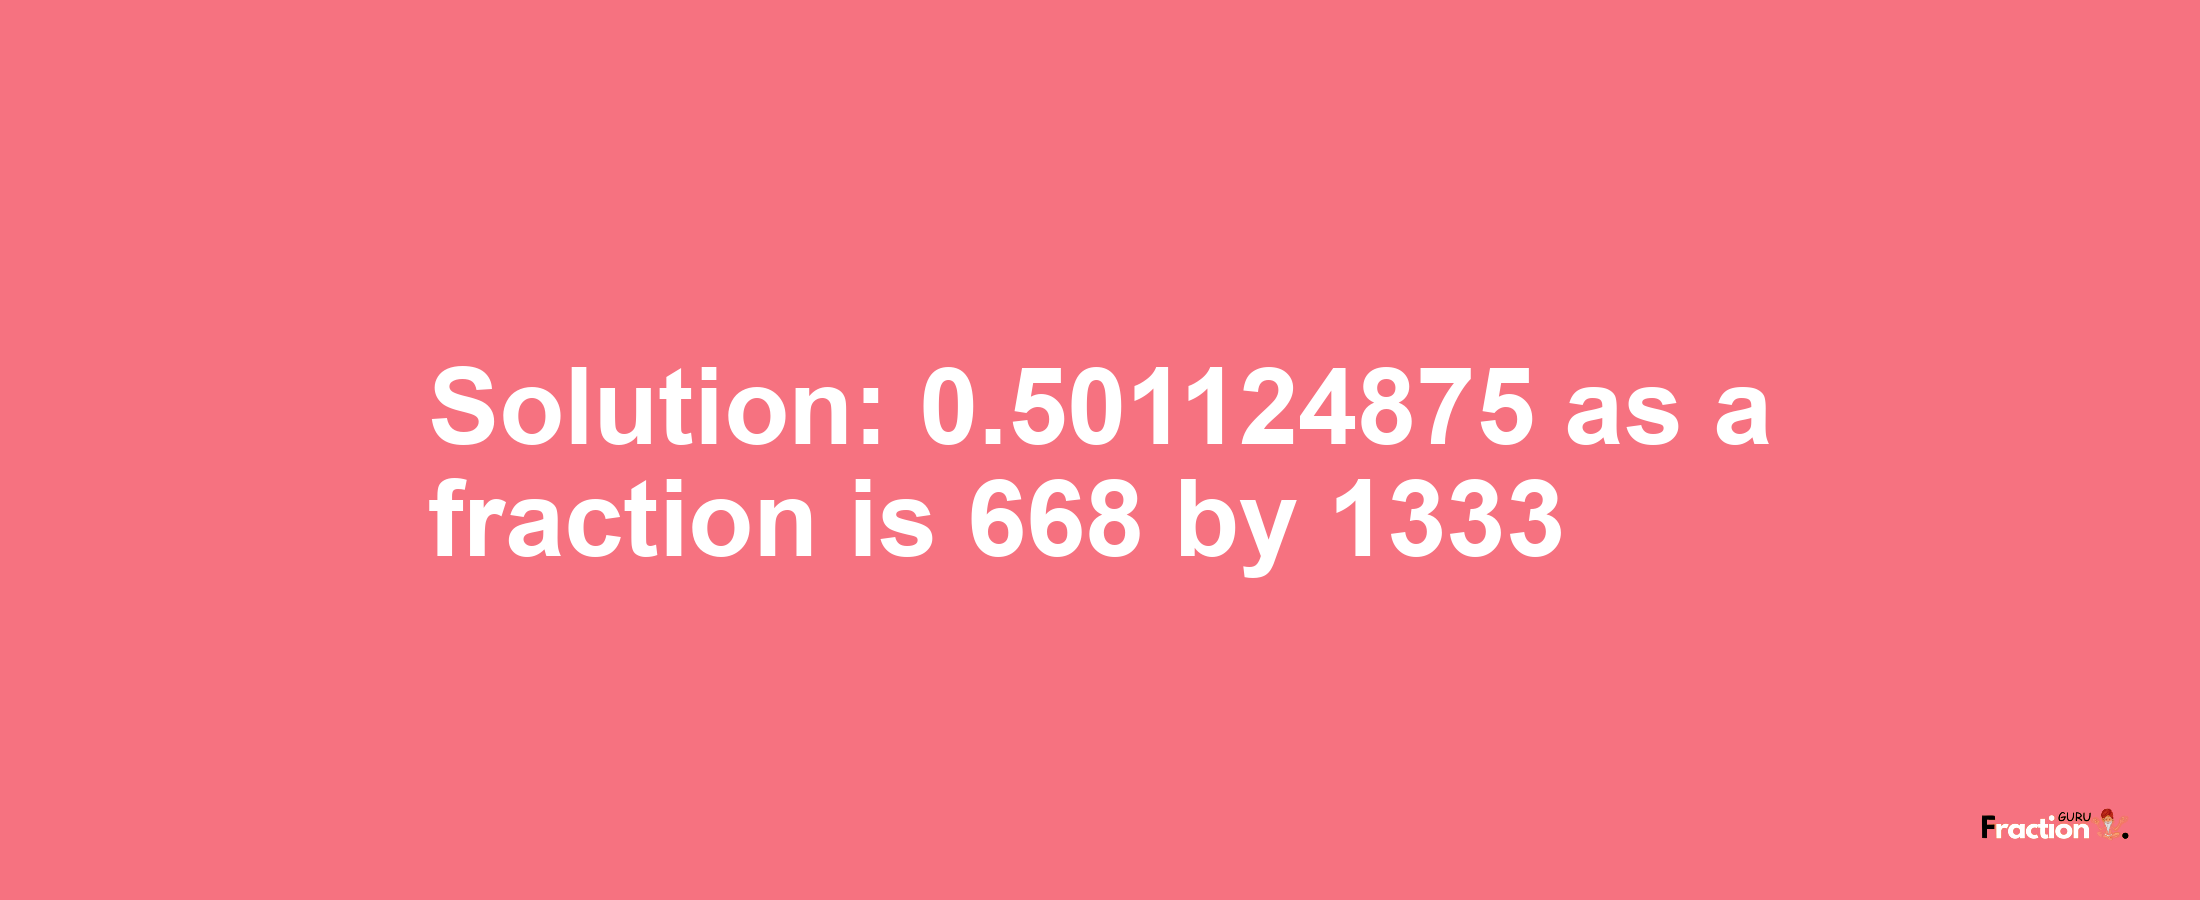 Solution:0.501124875 as a fraction is 668/1333